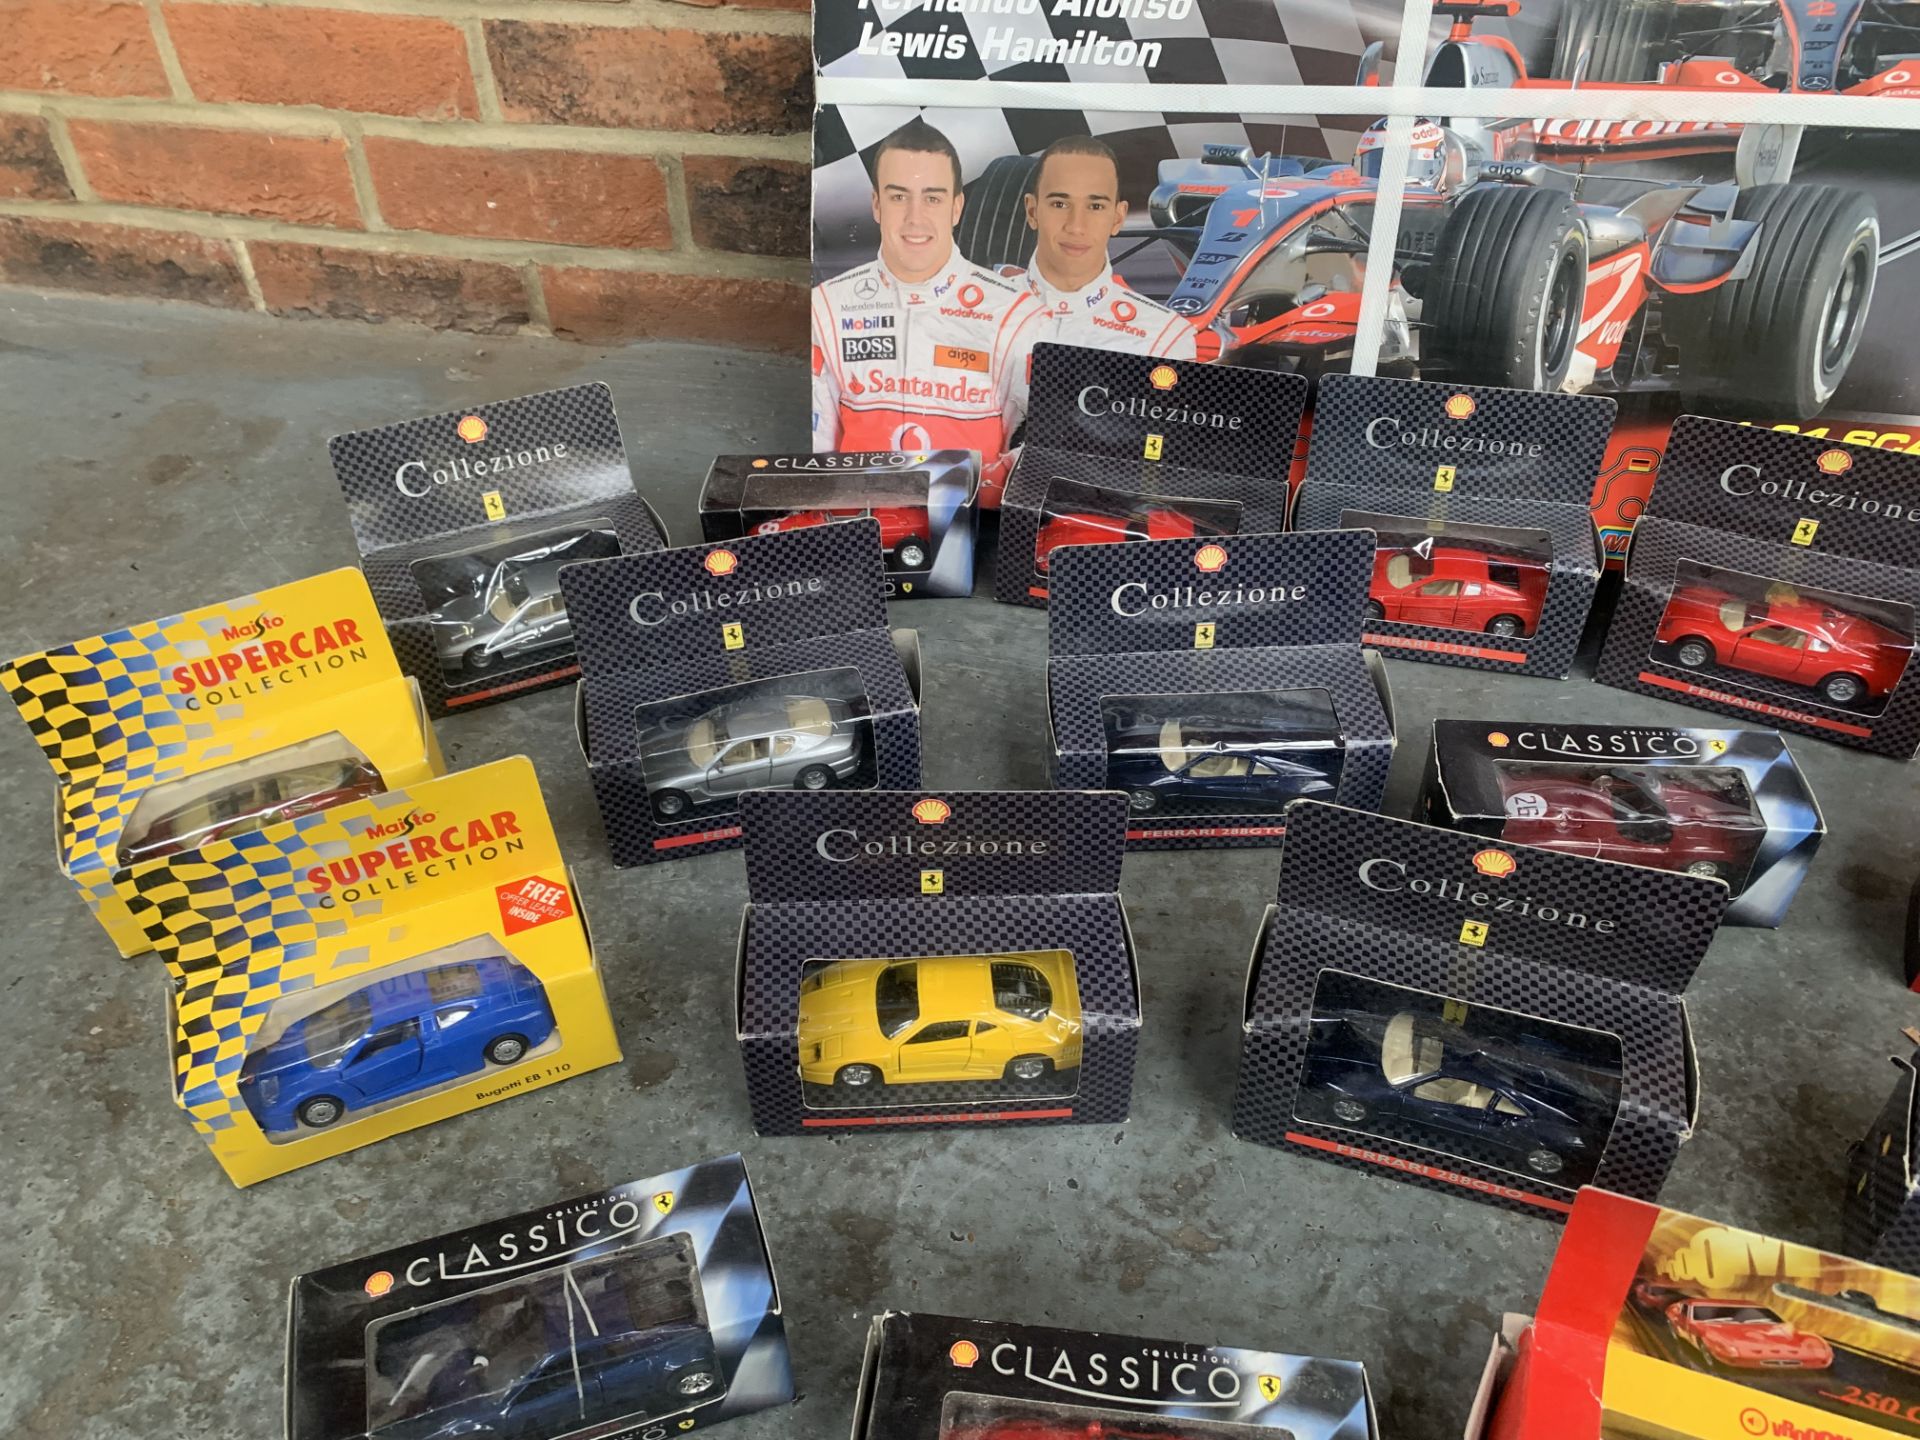 Boxed Shell Super Car Models and Micro Scalectric Set - Image 3 of 6